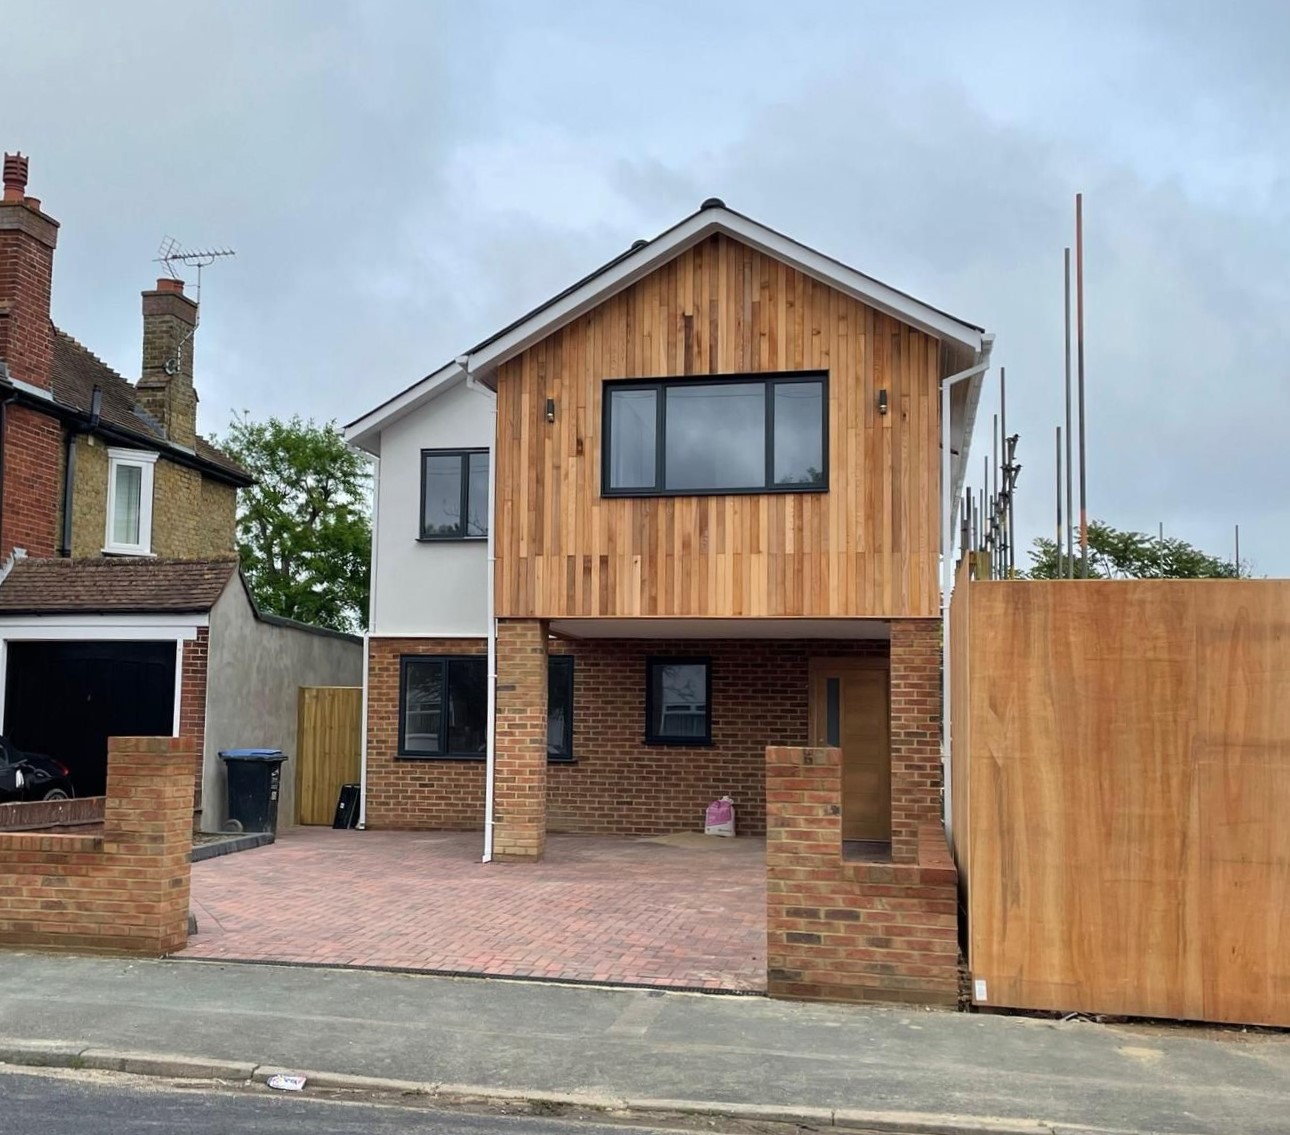 New Build bright and spacious 4/5 bedroom property in the popular seaside town of Broadstairs.    *10 Year Guarantee *Two En-Suites *Landscaped Gardens *Summer House *Flat Screen TVs included in the Lounge, Dining Room & All Bedrooms *Fitted Kitchen *Appliances Included.